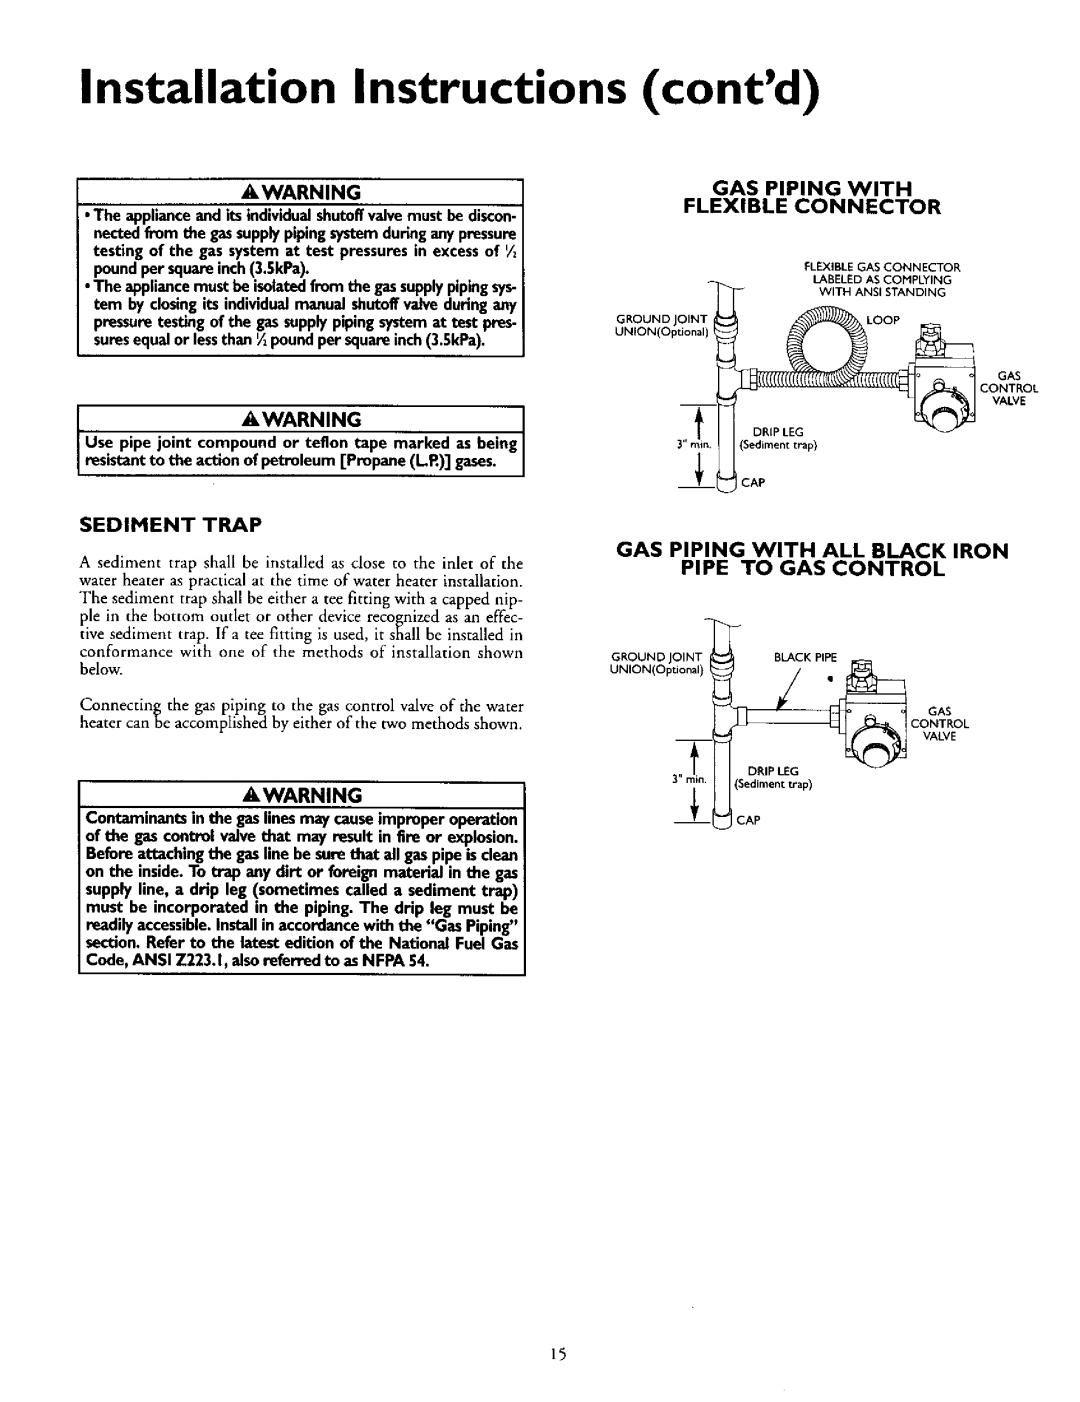 Kenmore 153.332463 Installation Instructions contd, 3,,T..sD, =Po, Warningi, Awarning, Gas Piping With All Black Iron 